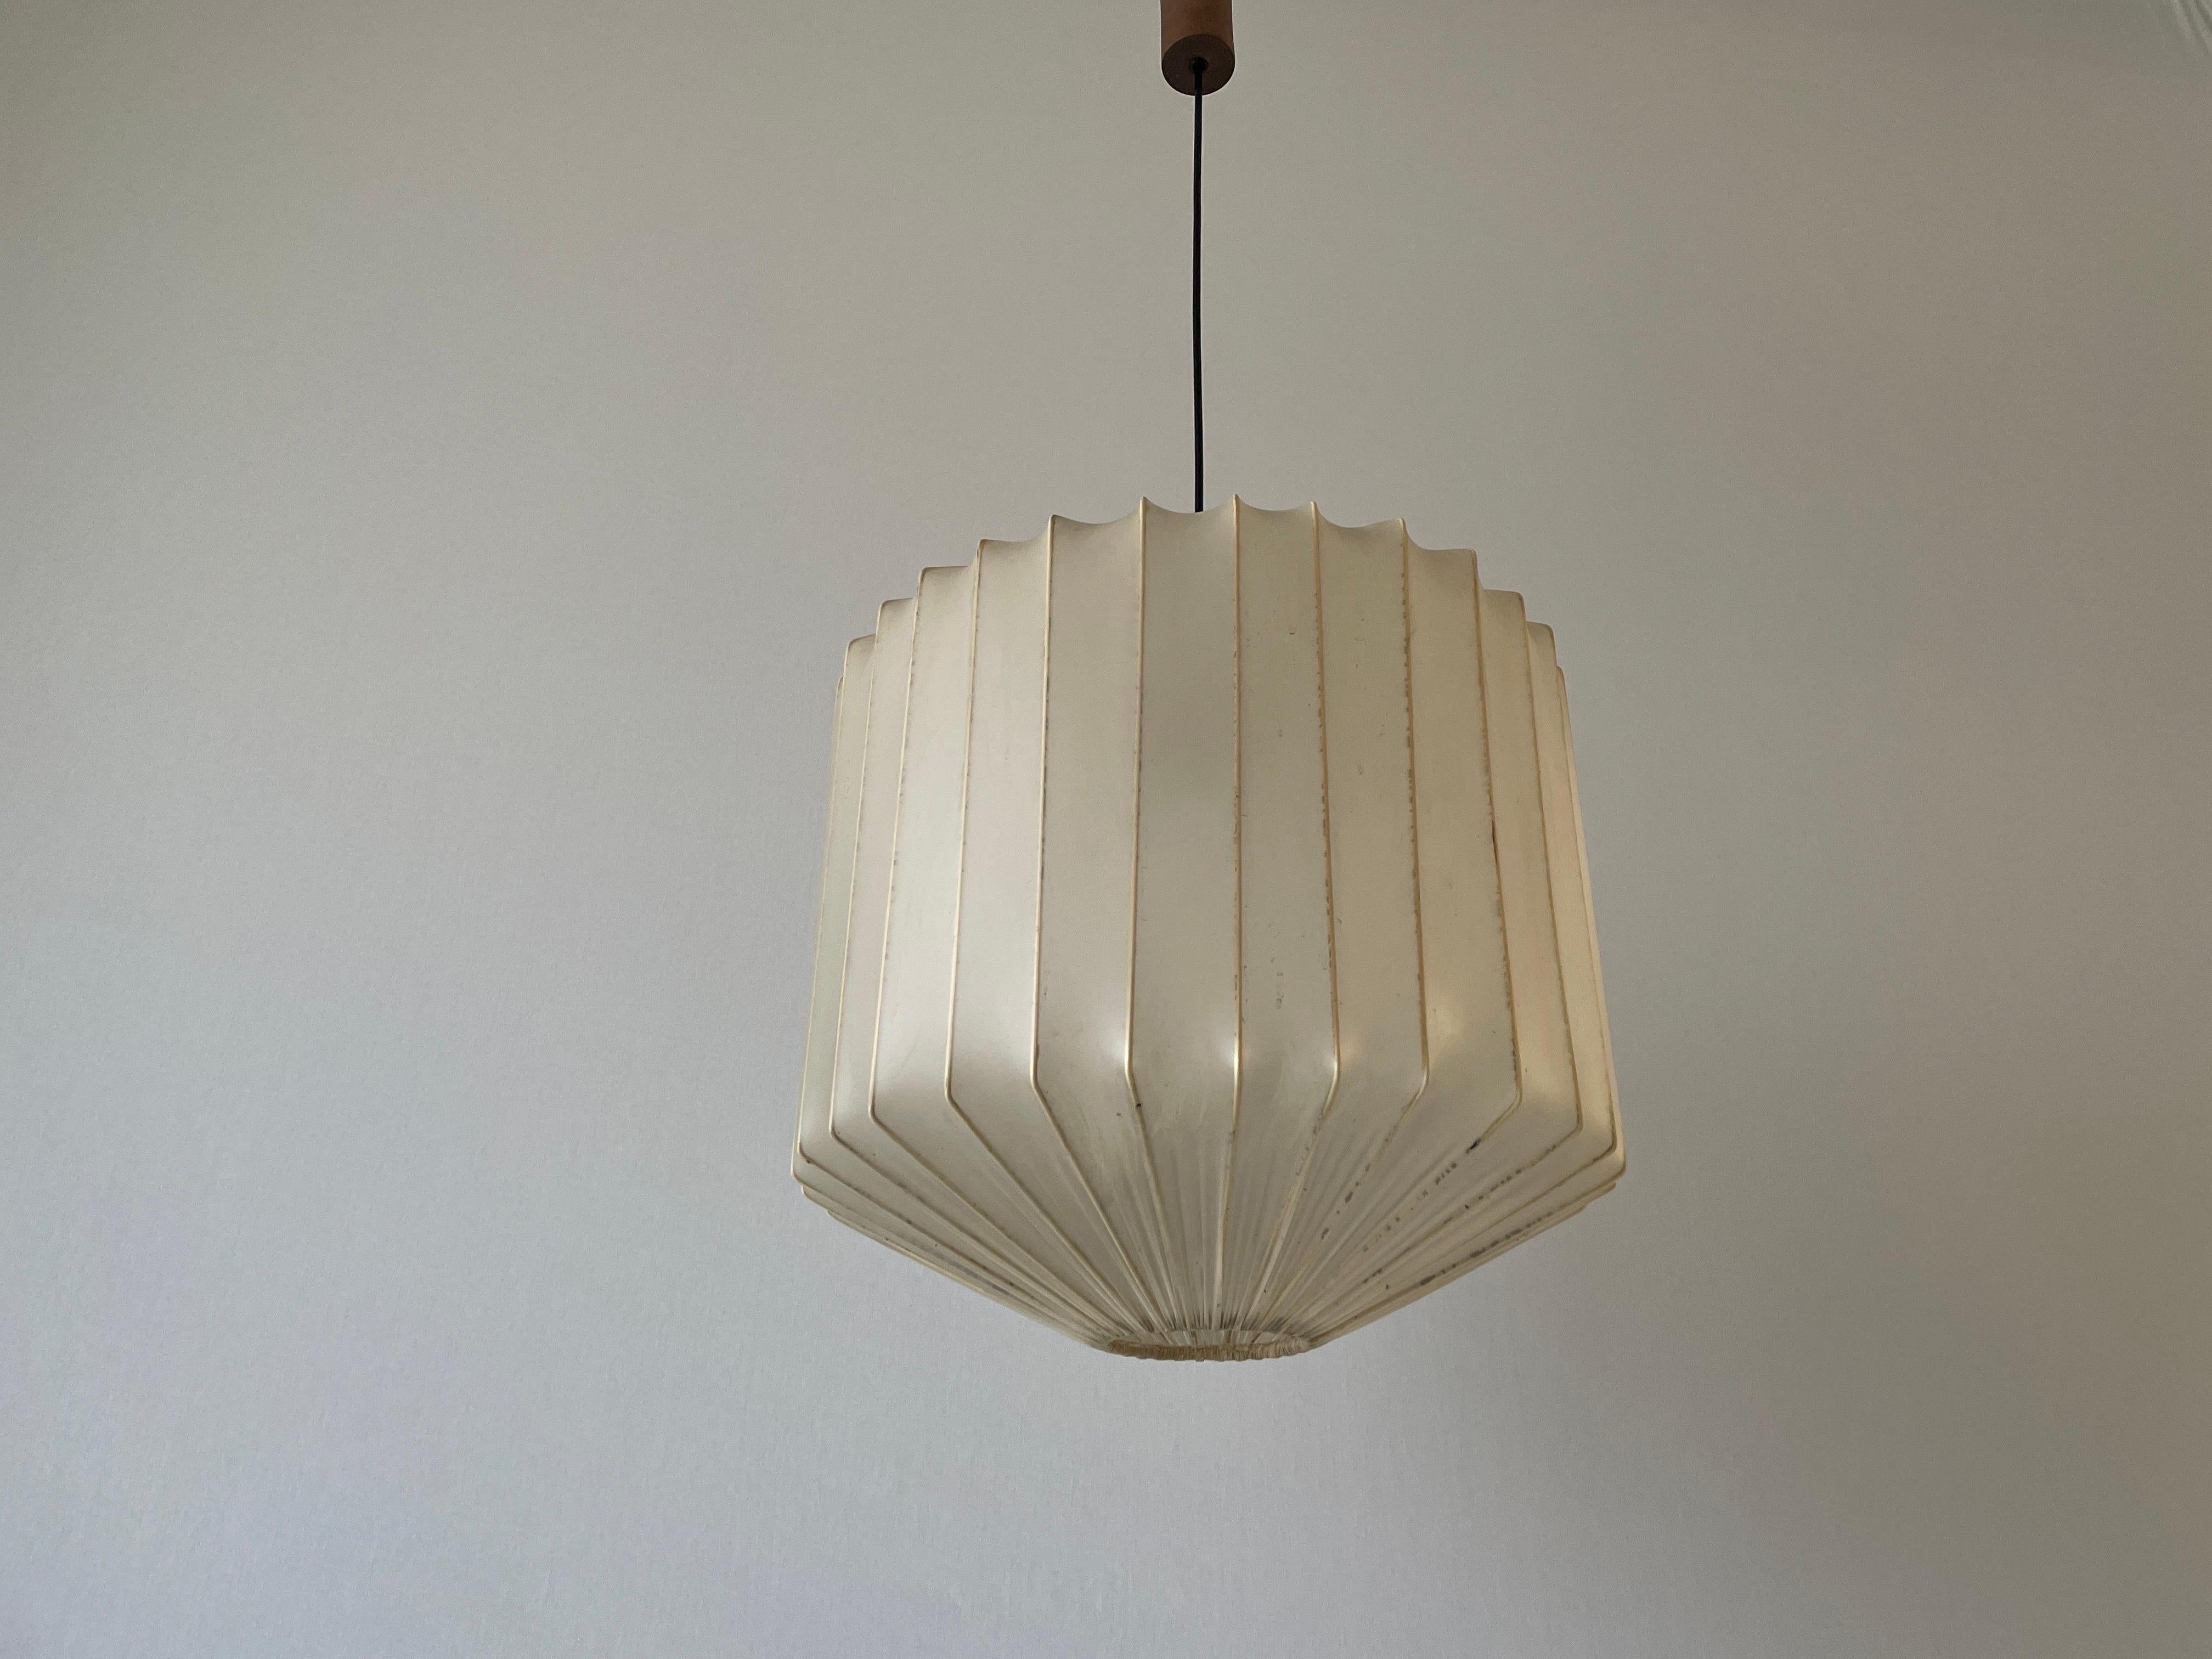 Satin Silk Fabric Ceiling Lamp in Cocoon Shape, 1960s, Italy For Sale 7